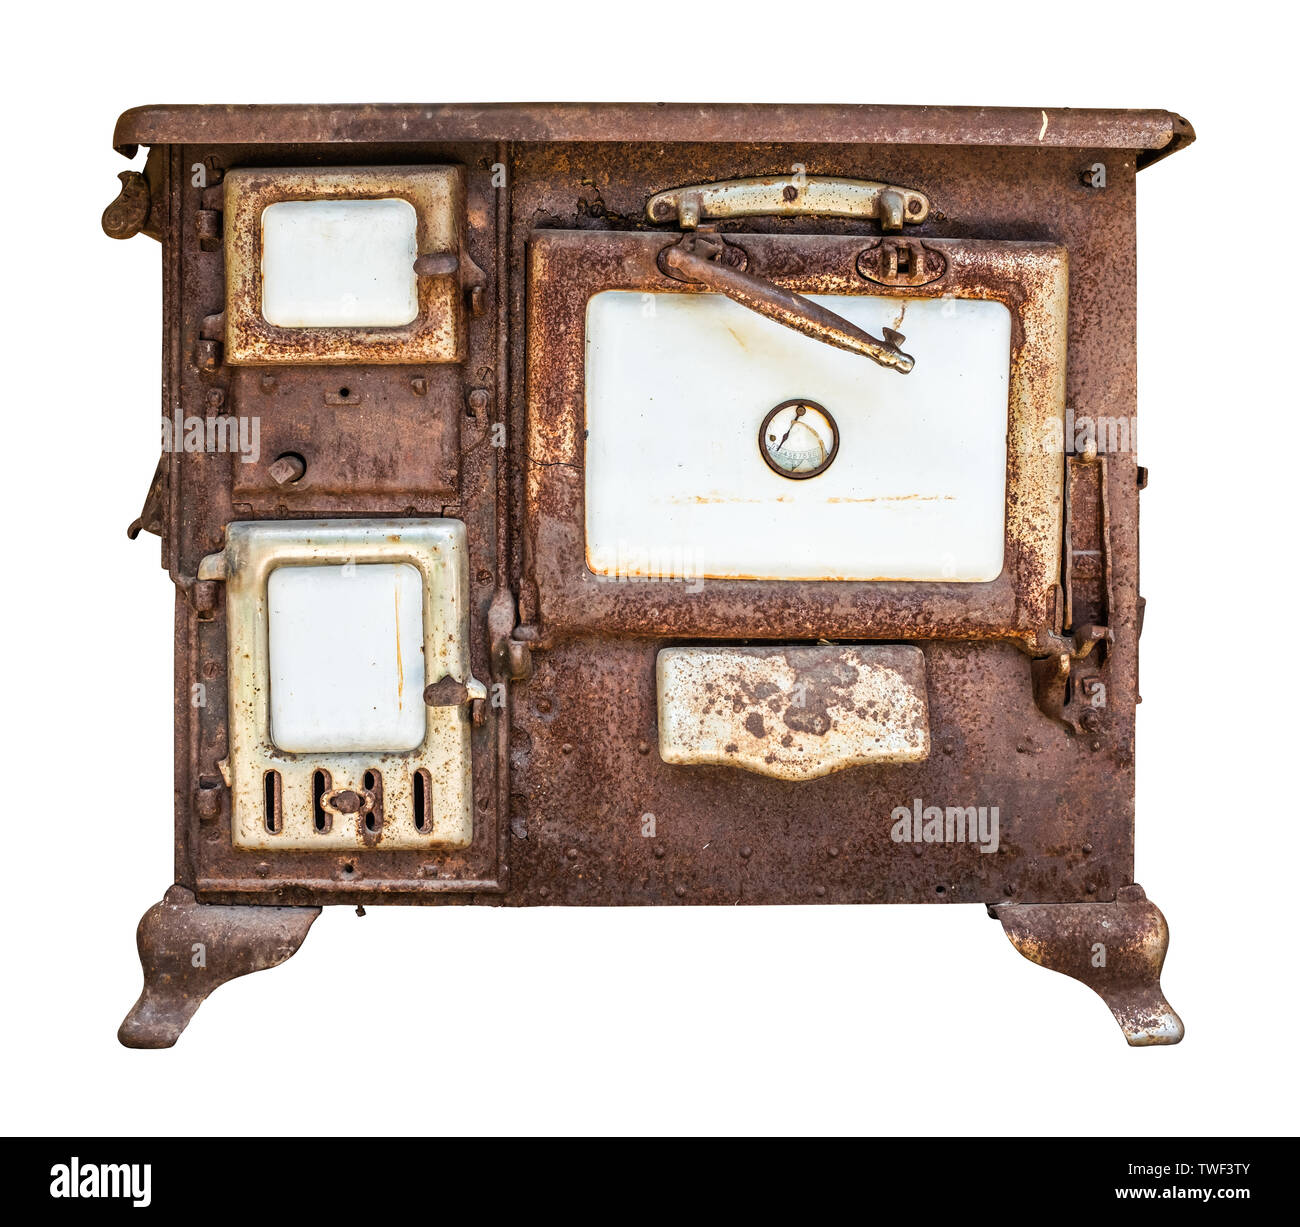 Isolated Rusty Old Farmhouse Stove, Oven Or Range On A White Background Stock Photo